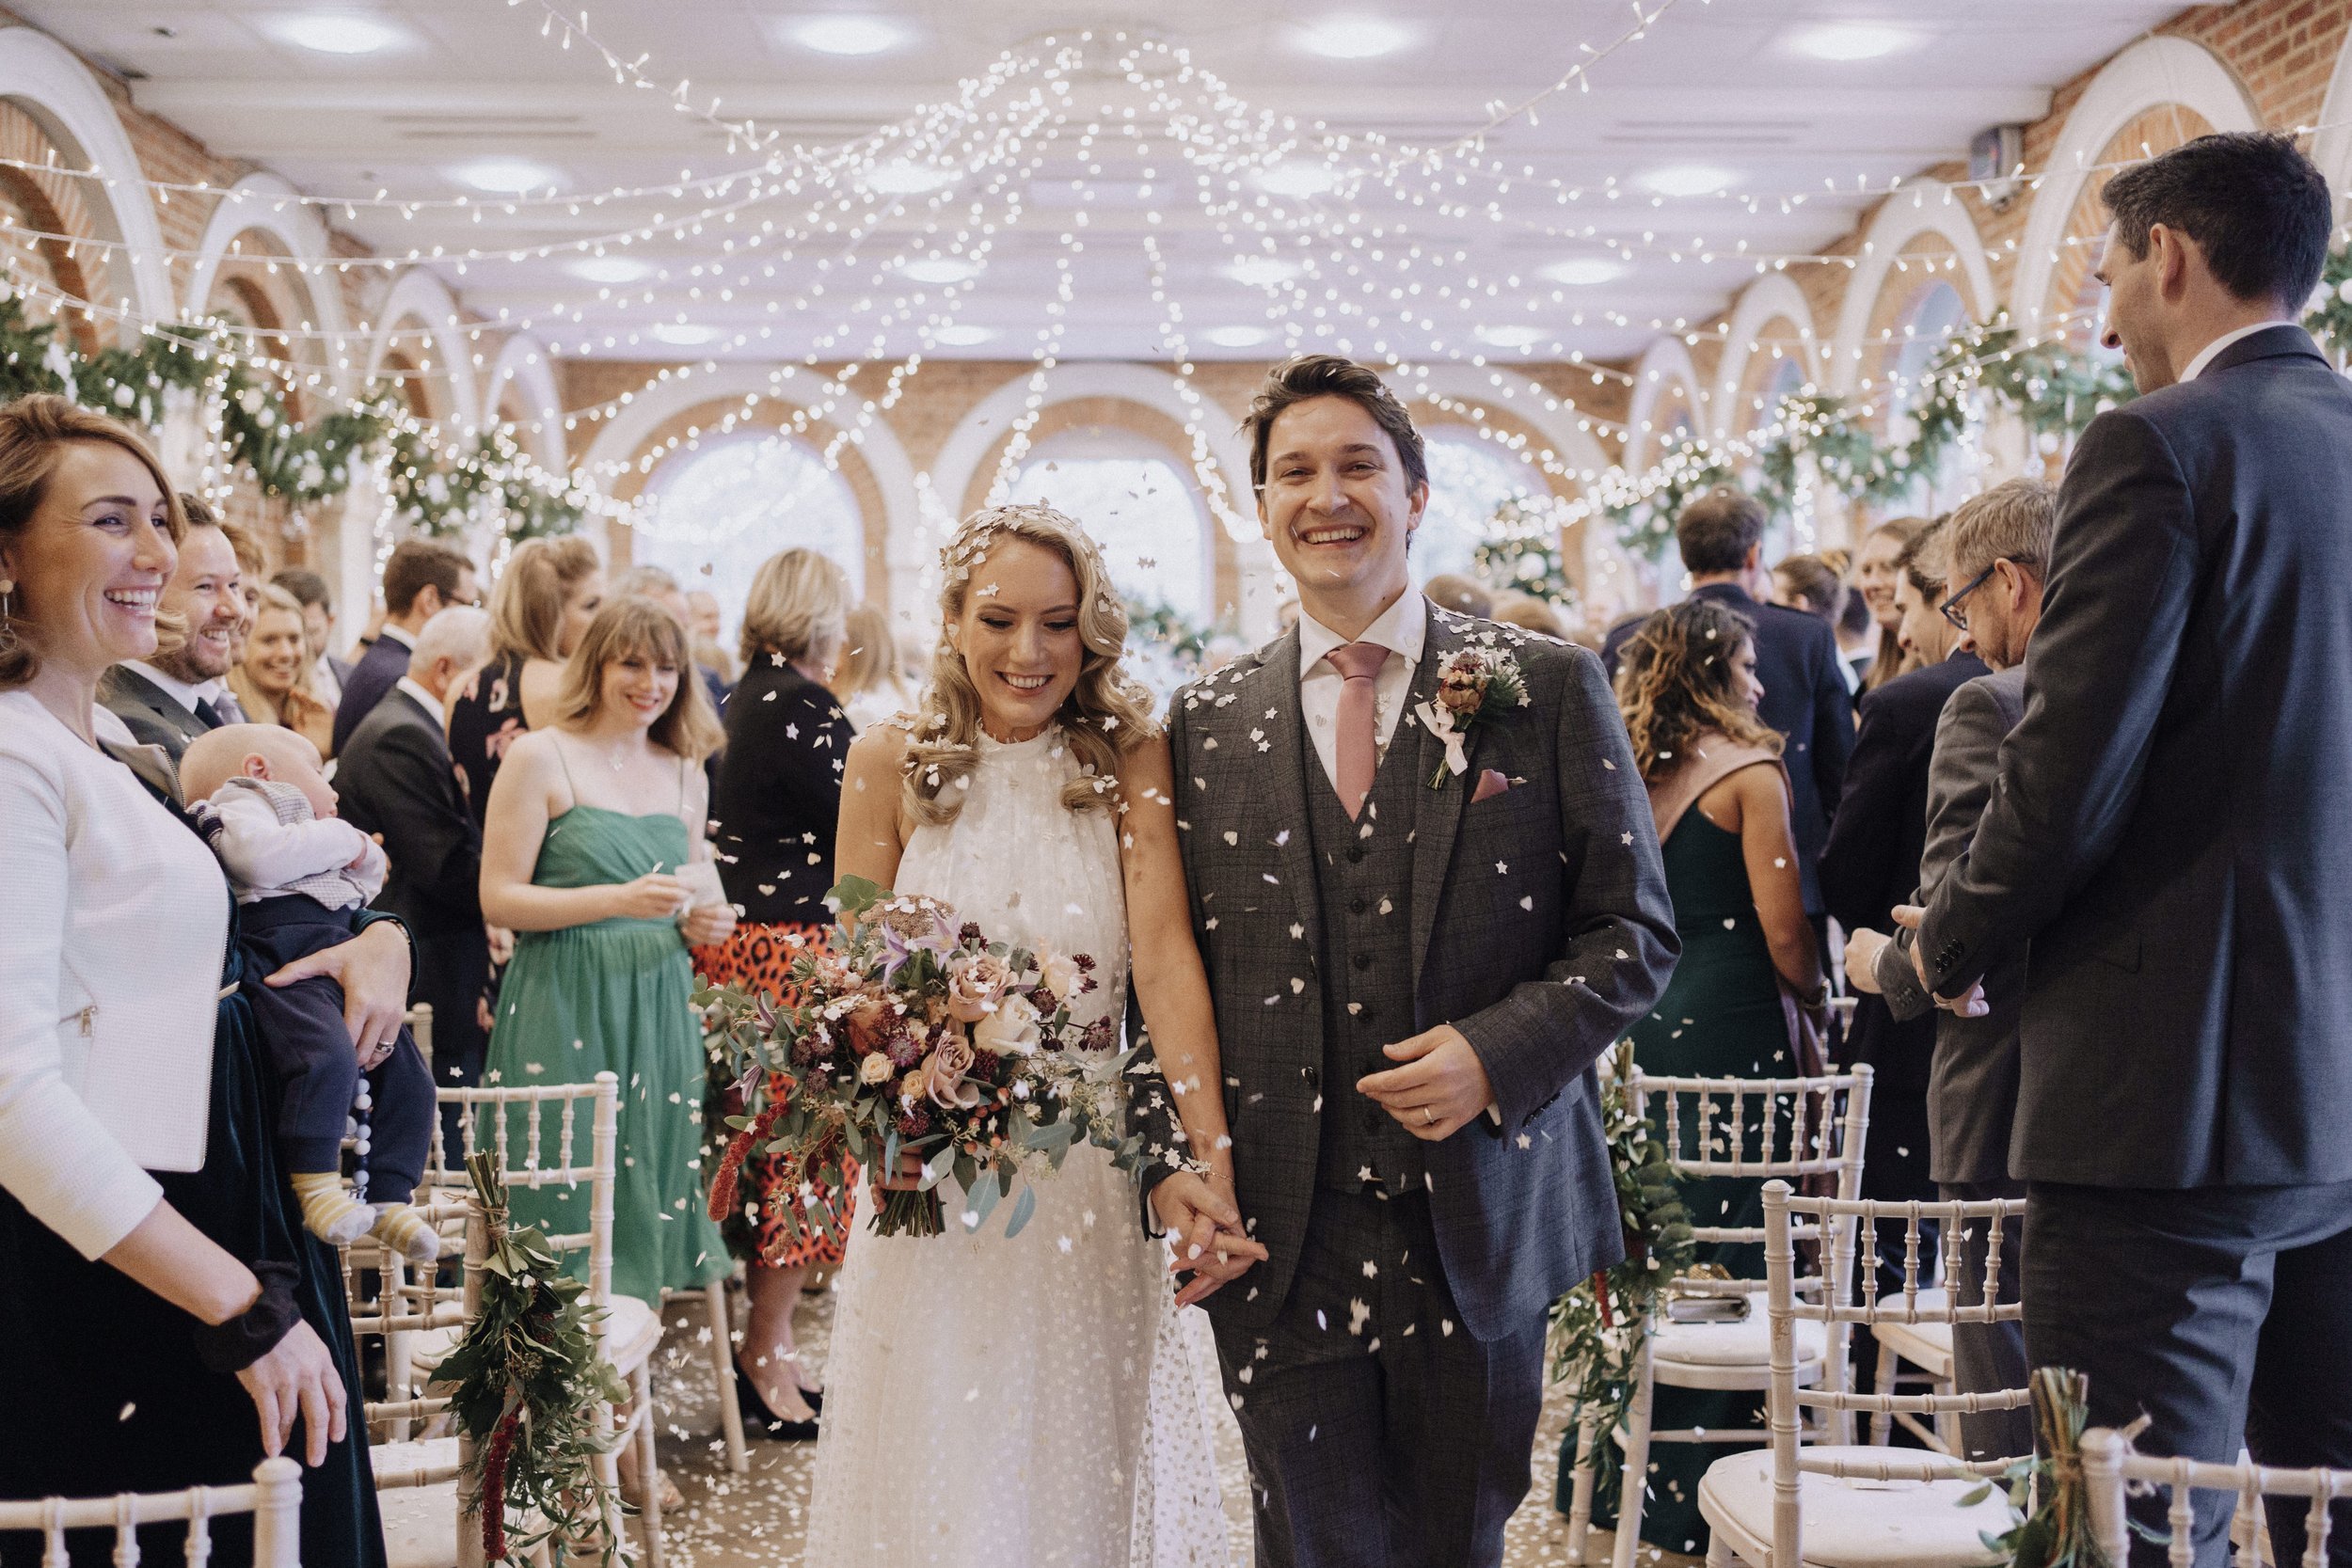 Beautiful bride Hannah wears Lucas Dress and Oliver Corset with the Riri Skirt by British bridal designer Kate Halfpenny